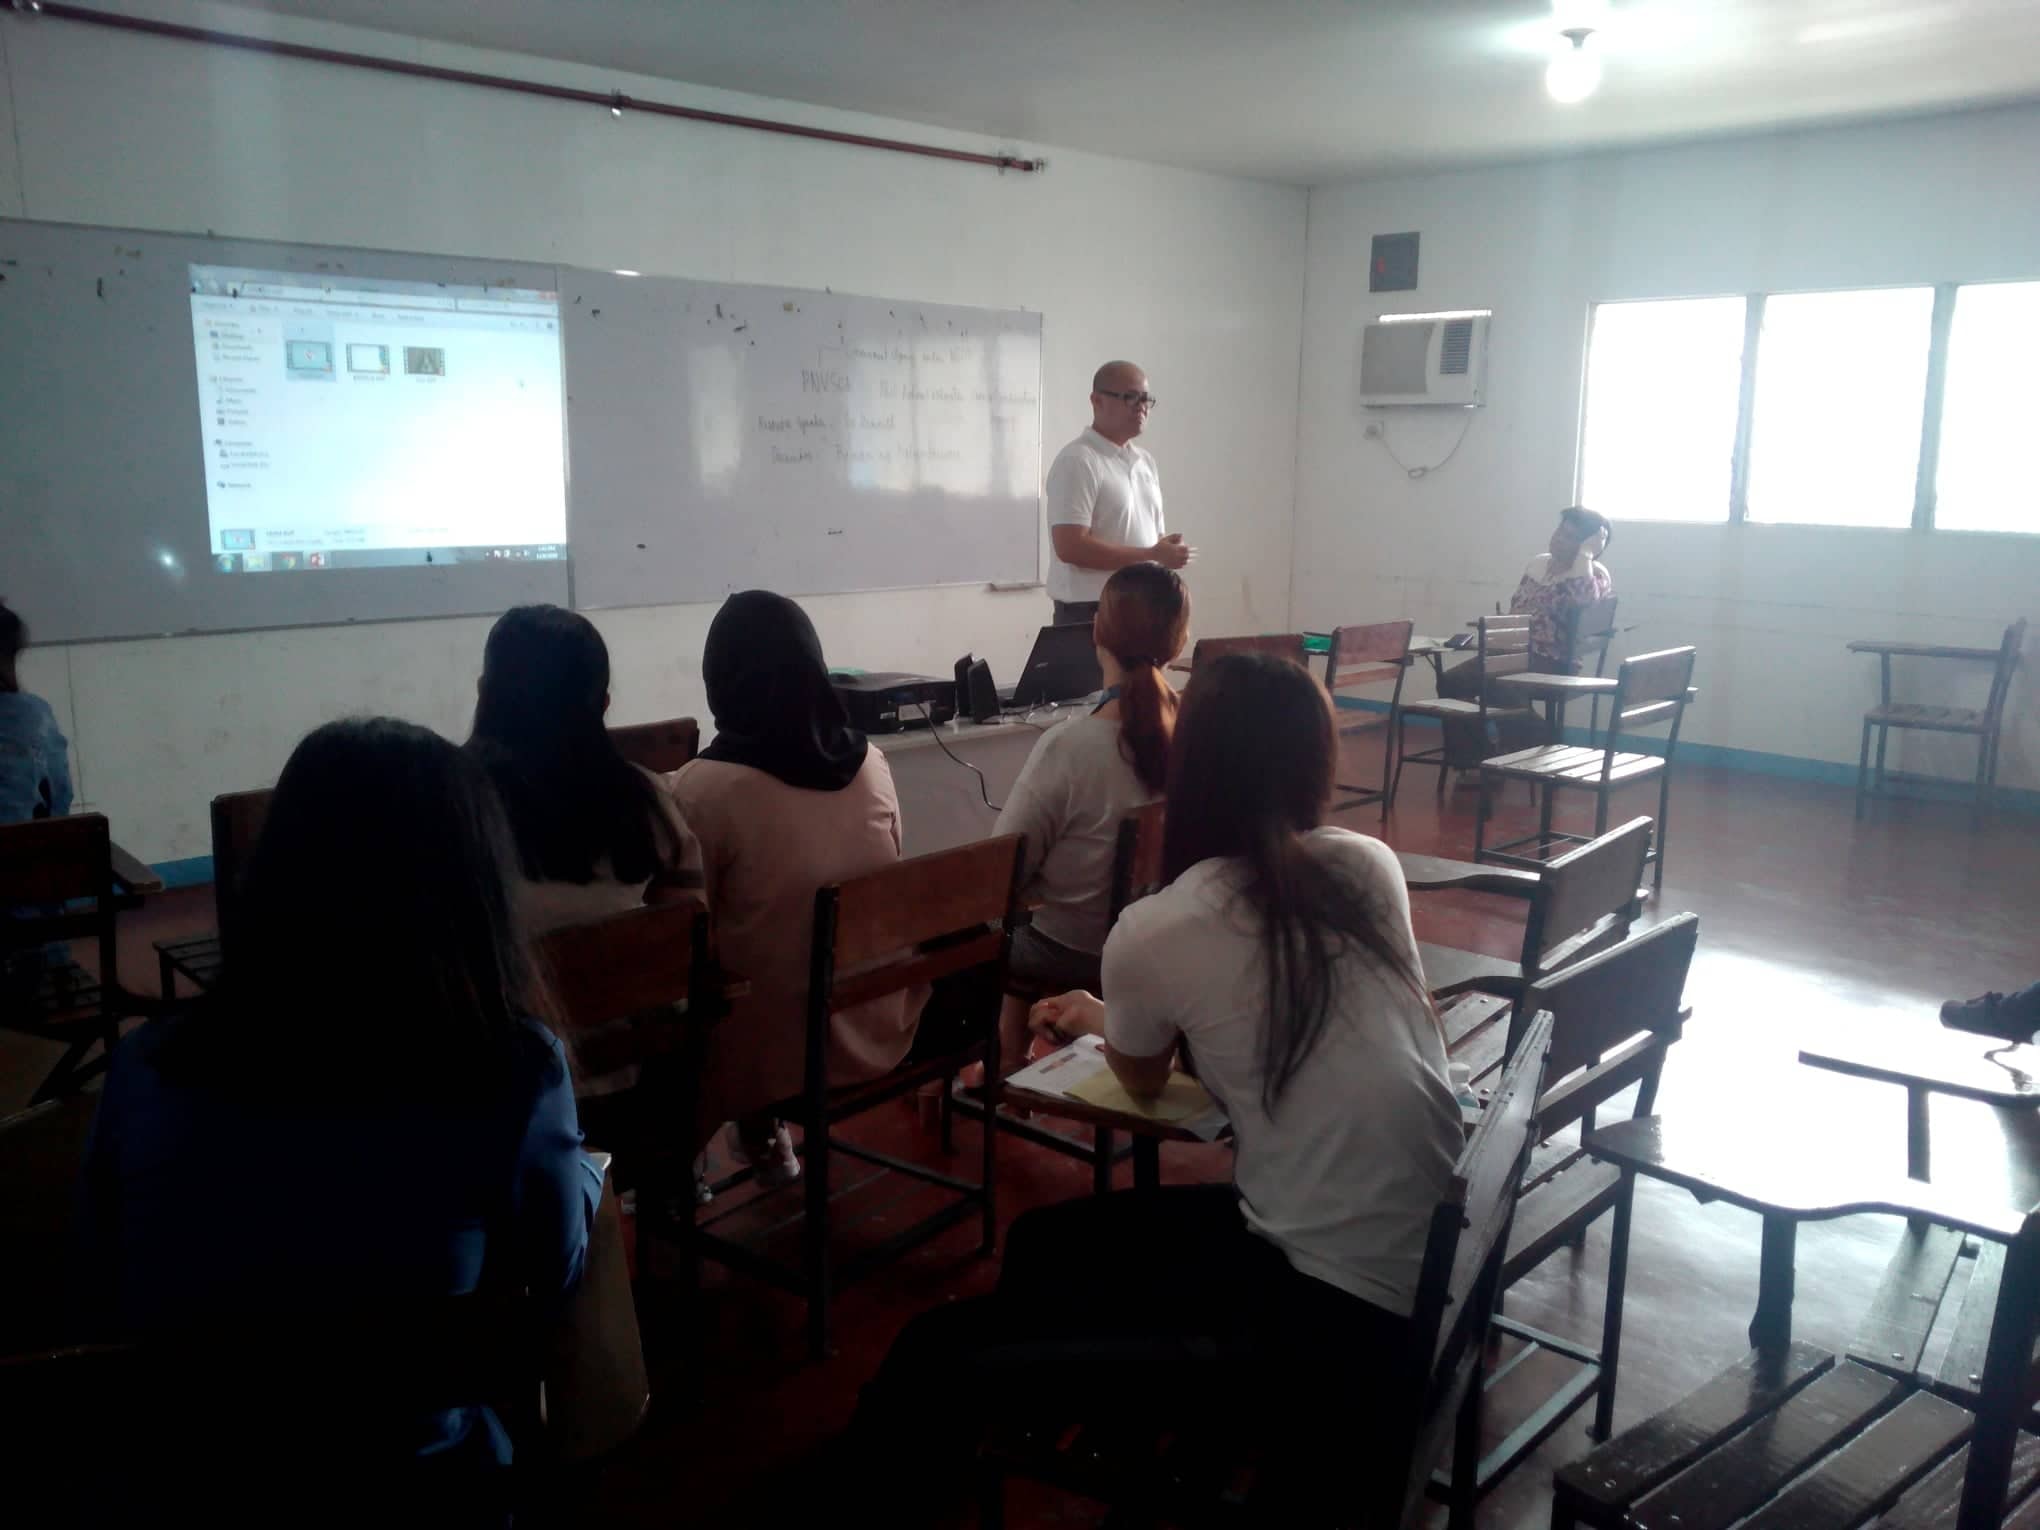 Orientation/Seminar on Volunteerism to selected AU Legarda students under the Community Development subject. Invited speaker was Mr. Kenneth Siruelo from Philippine National Volunteer Service Coordinating Agency.